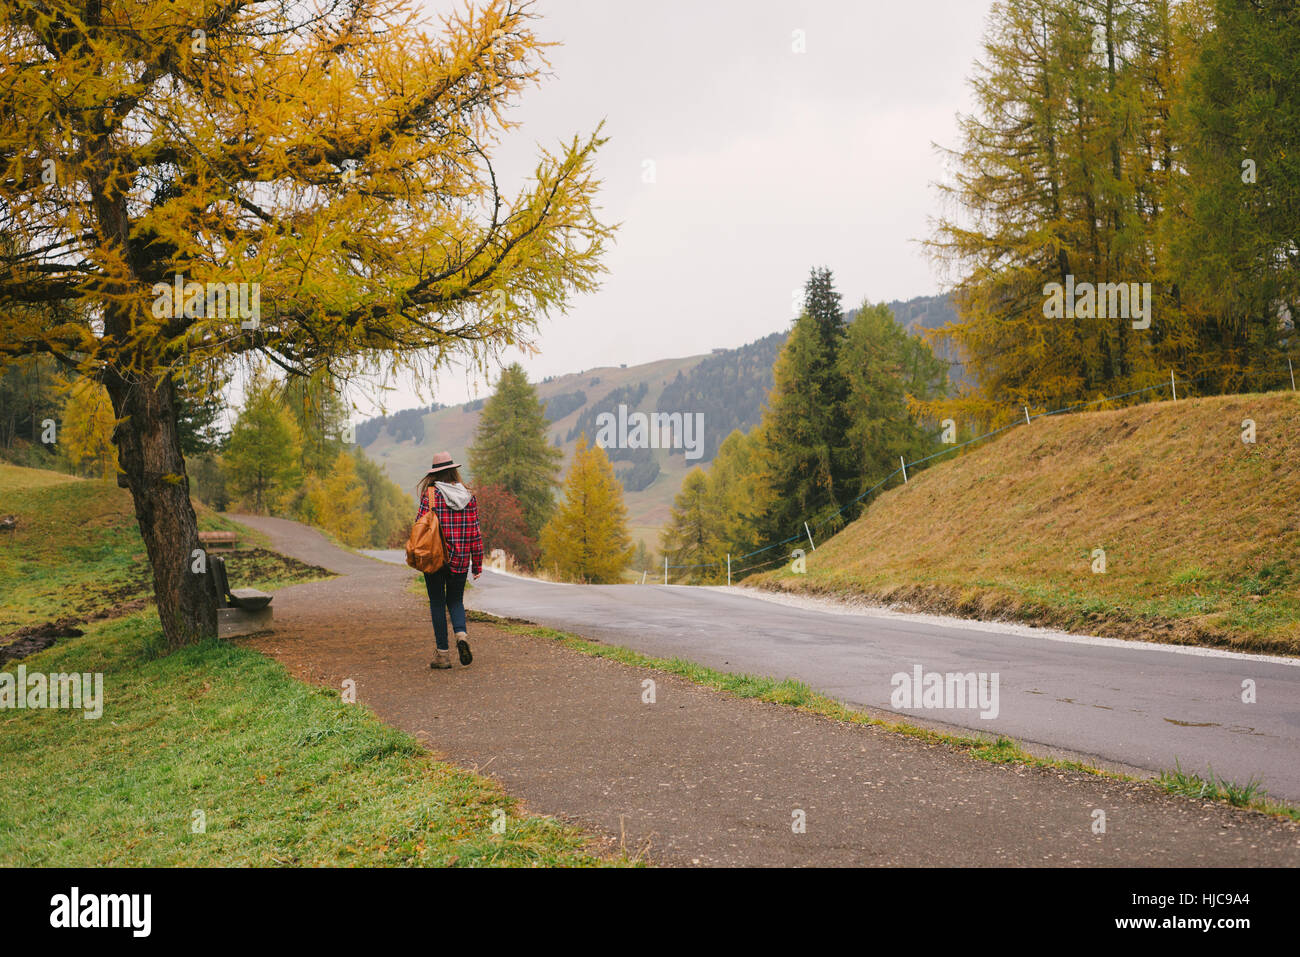 Hiker walking by road, Alpe di Siusi park, Dolomite Alps, South Tyrol, Italy Stock Photo